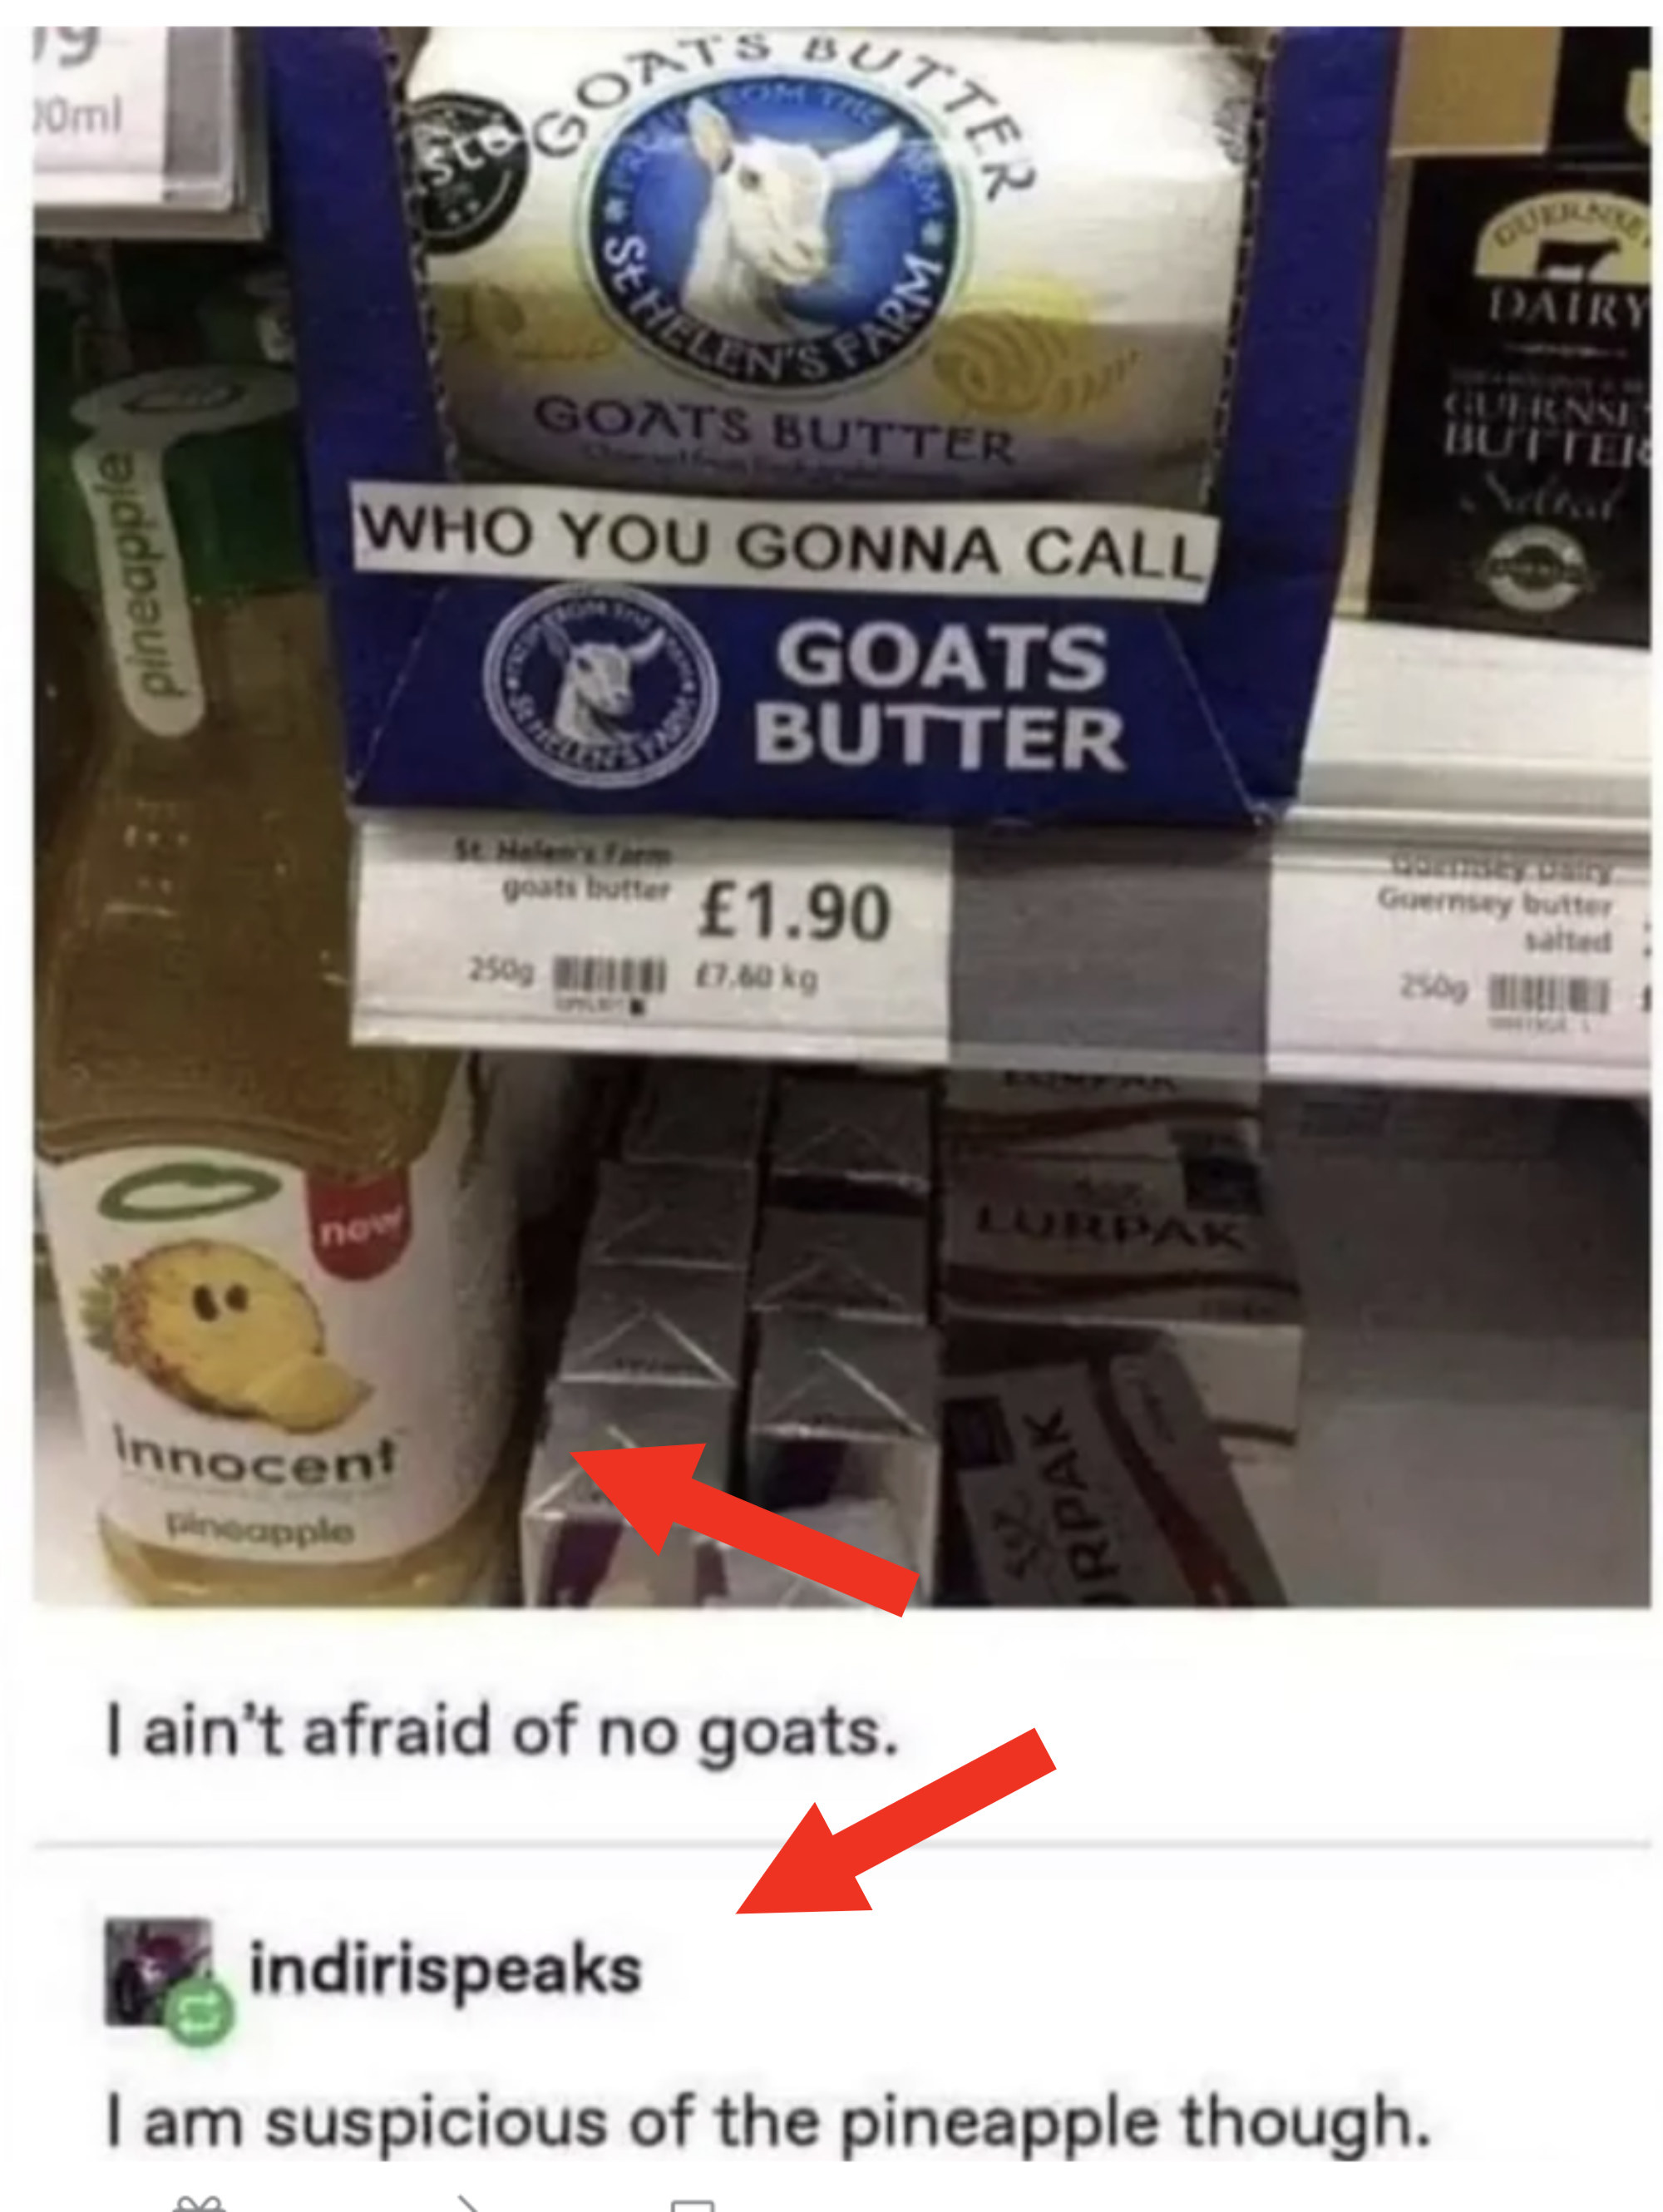 A picture says "who you gonna call" over a brand called Goats Butter, and a commenter says "I am suspicious of the pineapple though"; in the photo, you can see a brand of pineapple juice called Innocent